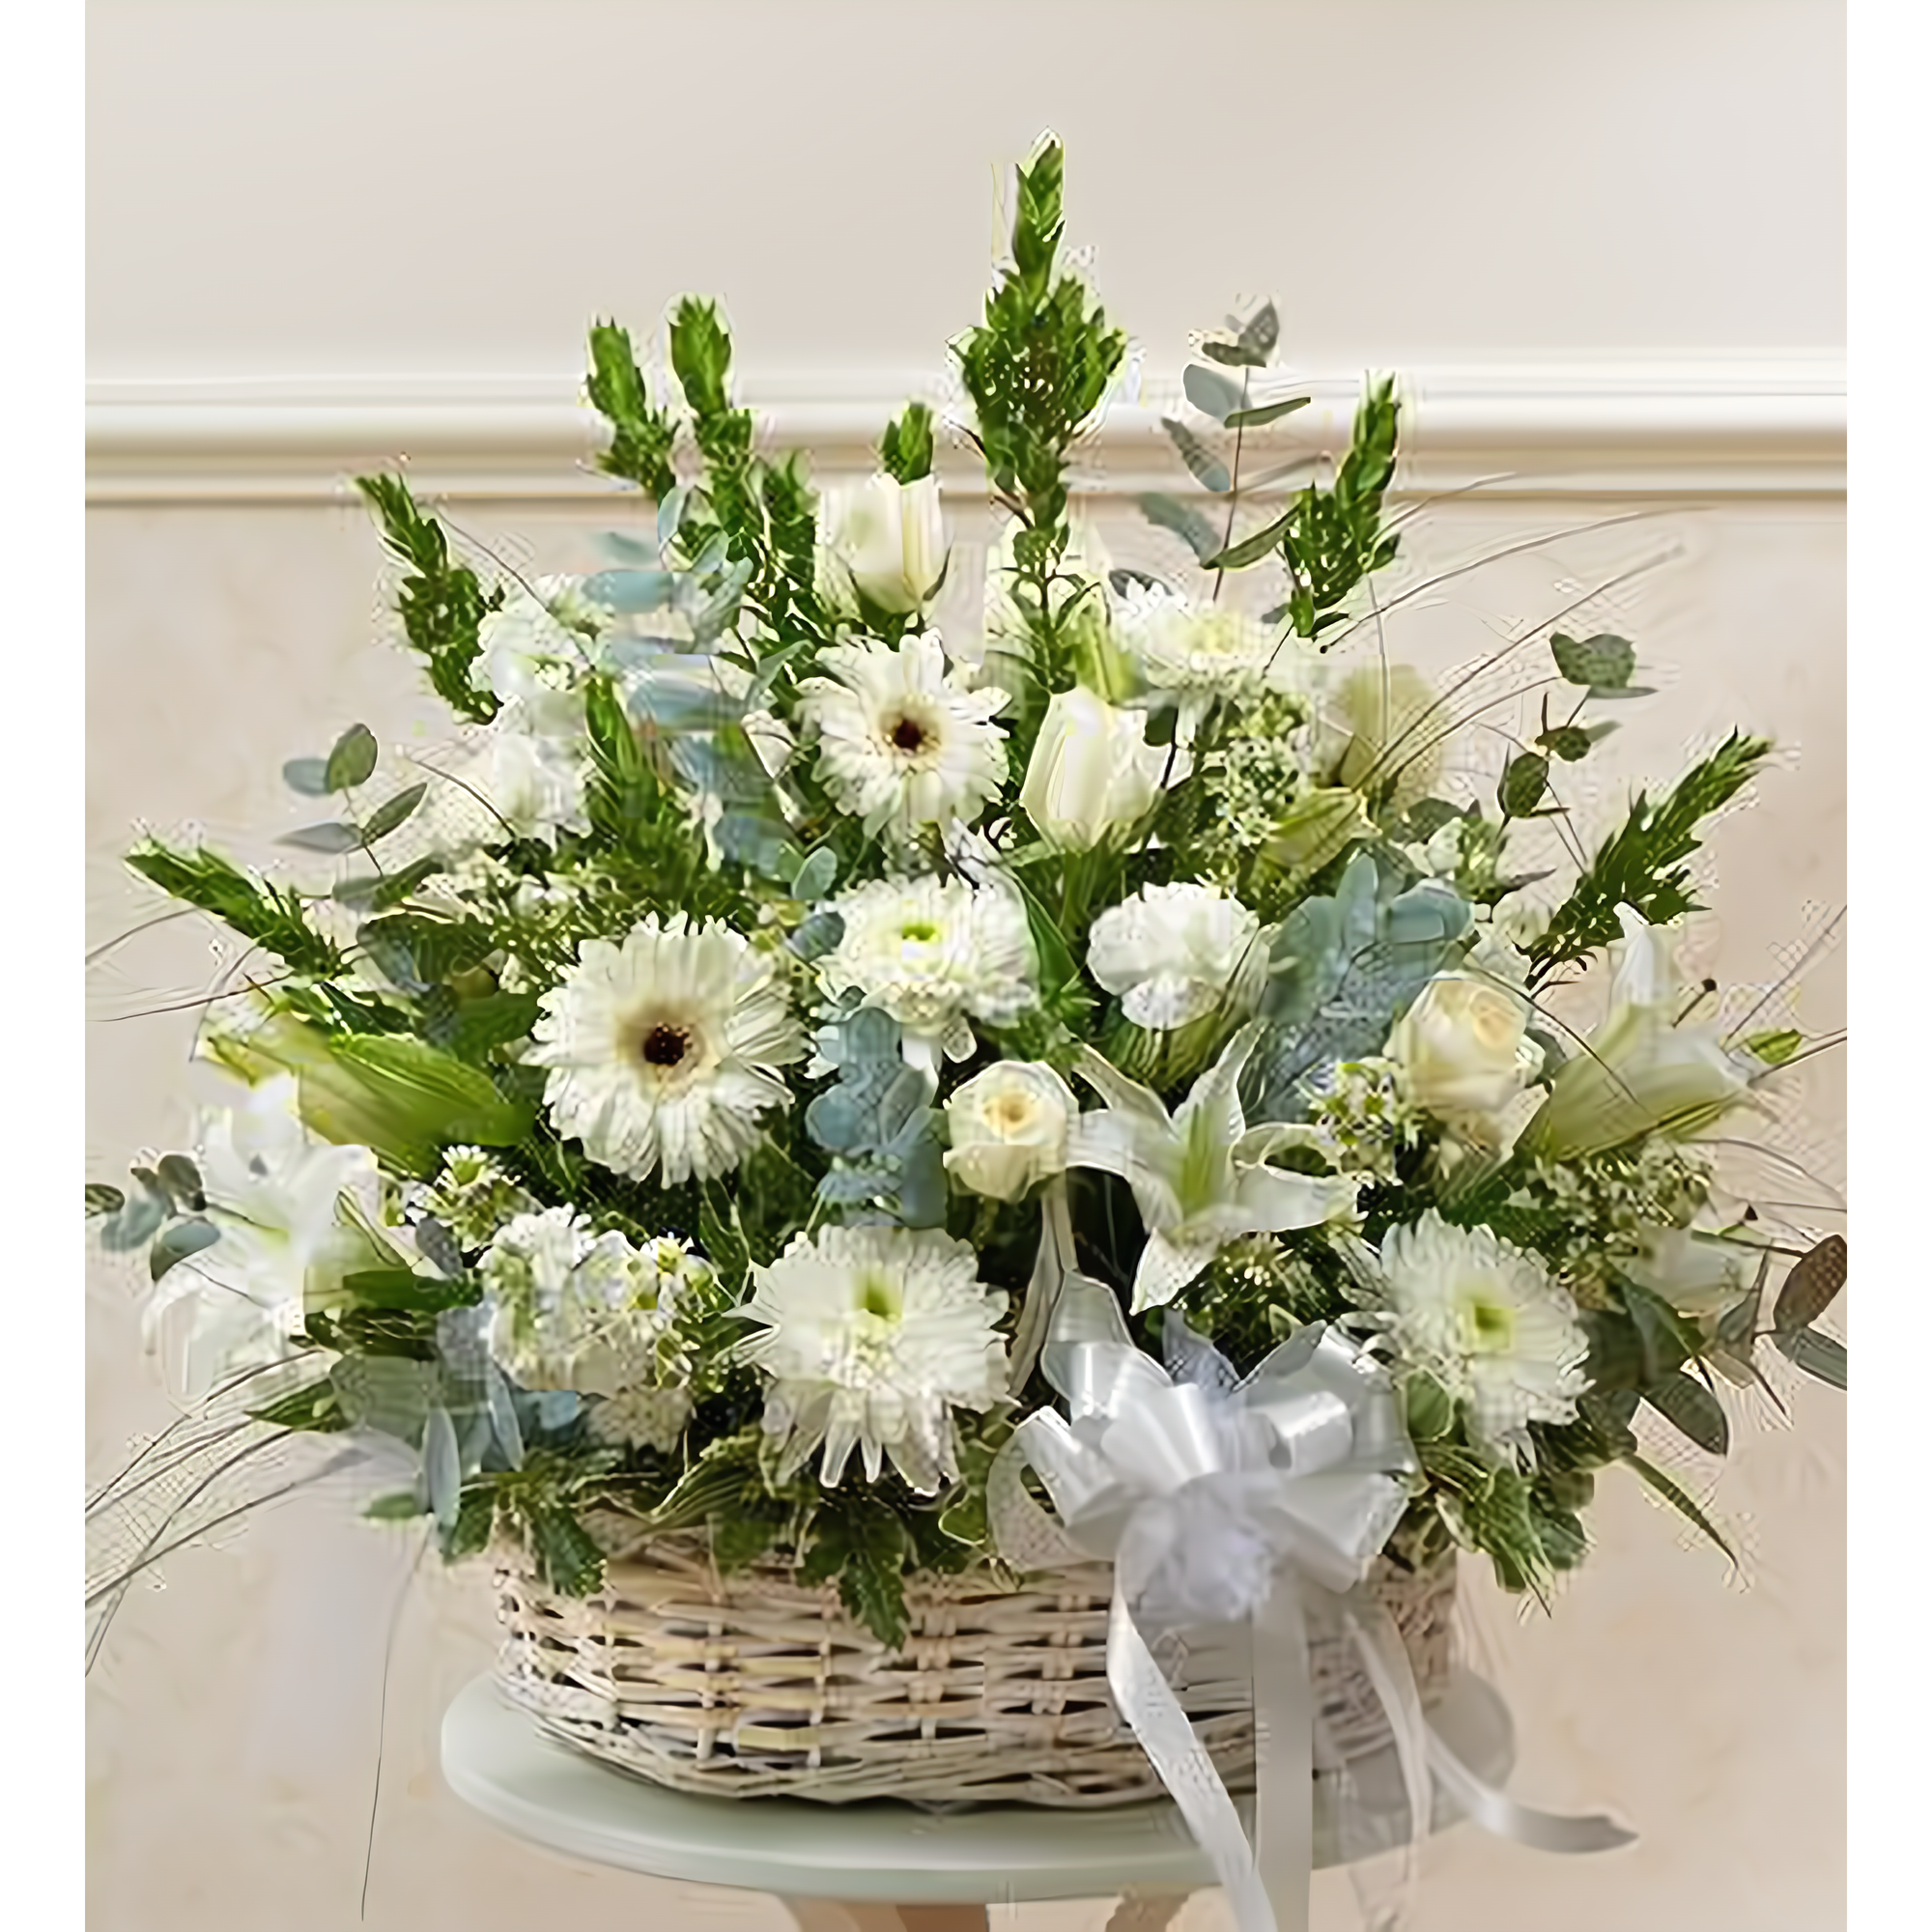 Manhattan Flower Delivery - White Sympathy Arrangement in Basket - Funeral > For the Service